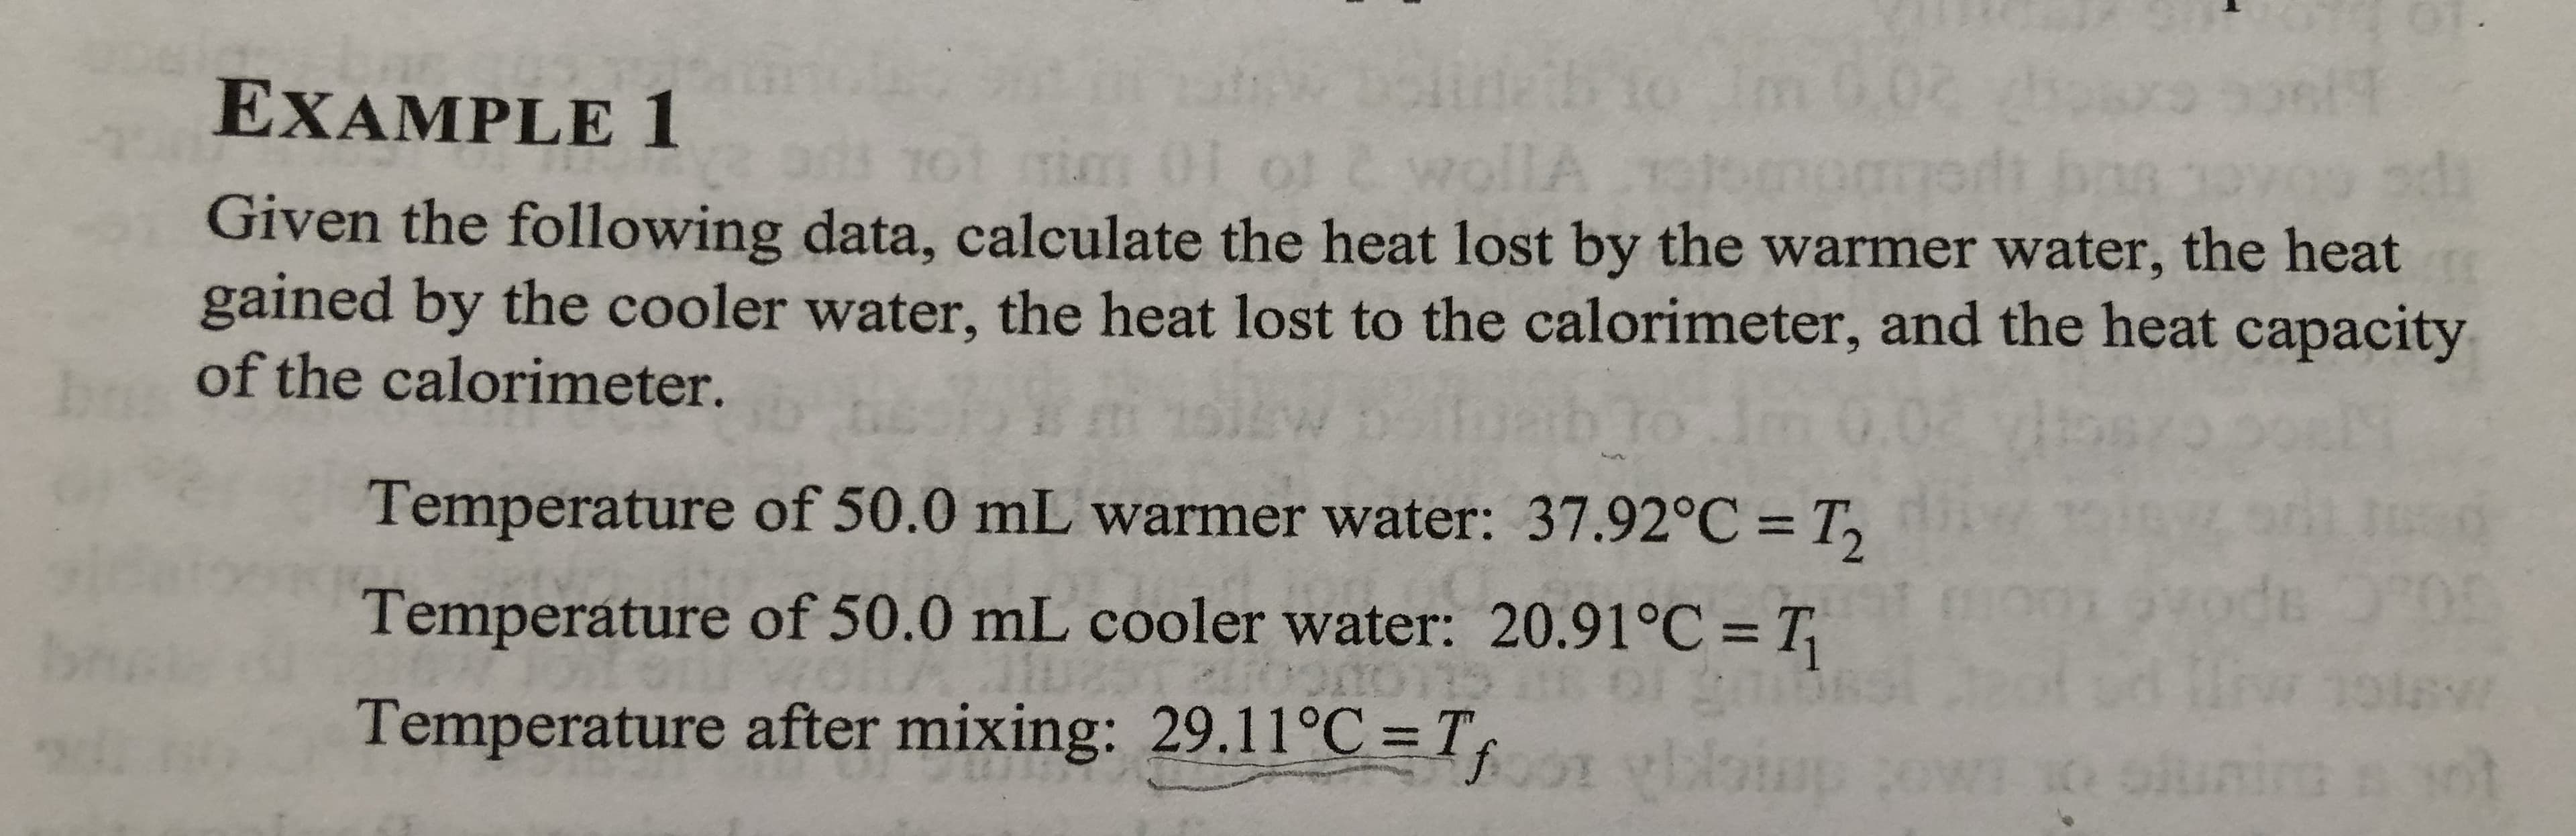 elt
EXAMPLE 1
2 wollA
Given the following data, calculate the heat lost by the warmer water, the heat
gained by the cooler water, the heat lost to the calorimeter, and the heat capacity
m01 o1
10
of the calorimeter.
tm
to Jm
Temperature of 50.0 mL warmer water: 37.92°C T
du O 0:
1
Temperature of 50.0 mL cooler water: 20.91°C = T
OI 90
Temperature after mixing: 29.11°C = T, vinim
ai
ALIOOOTS
19
W
oUAO: demck
